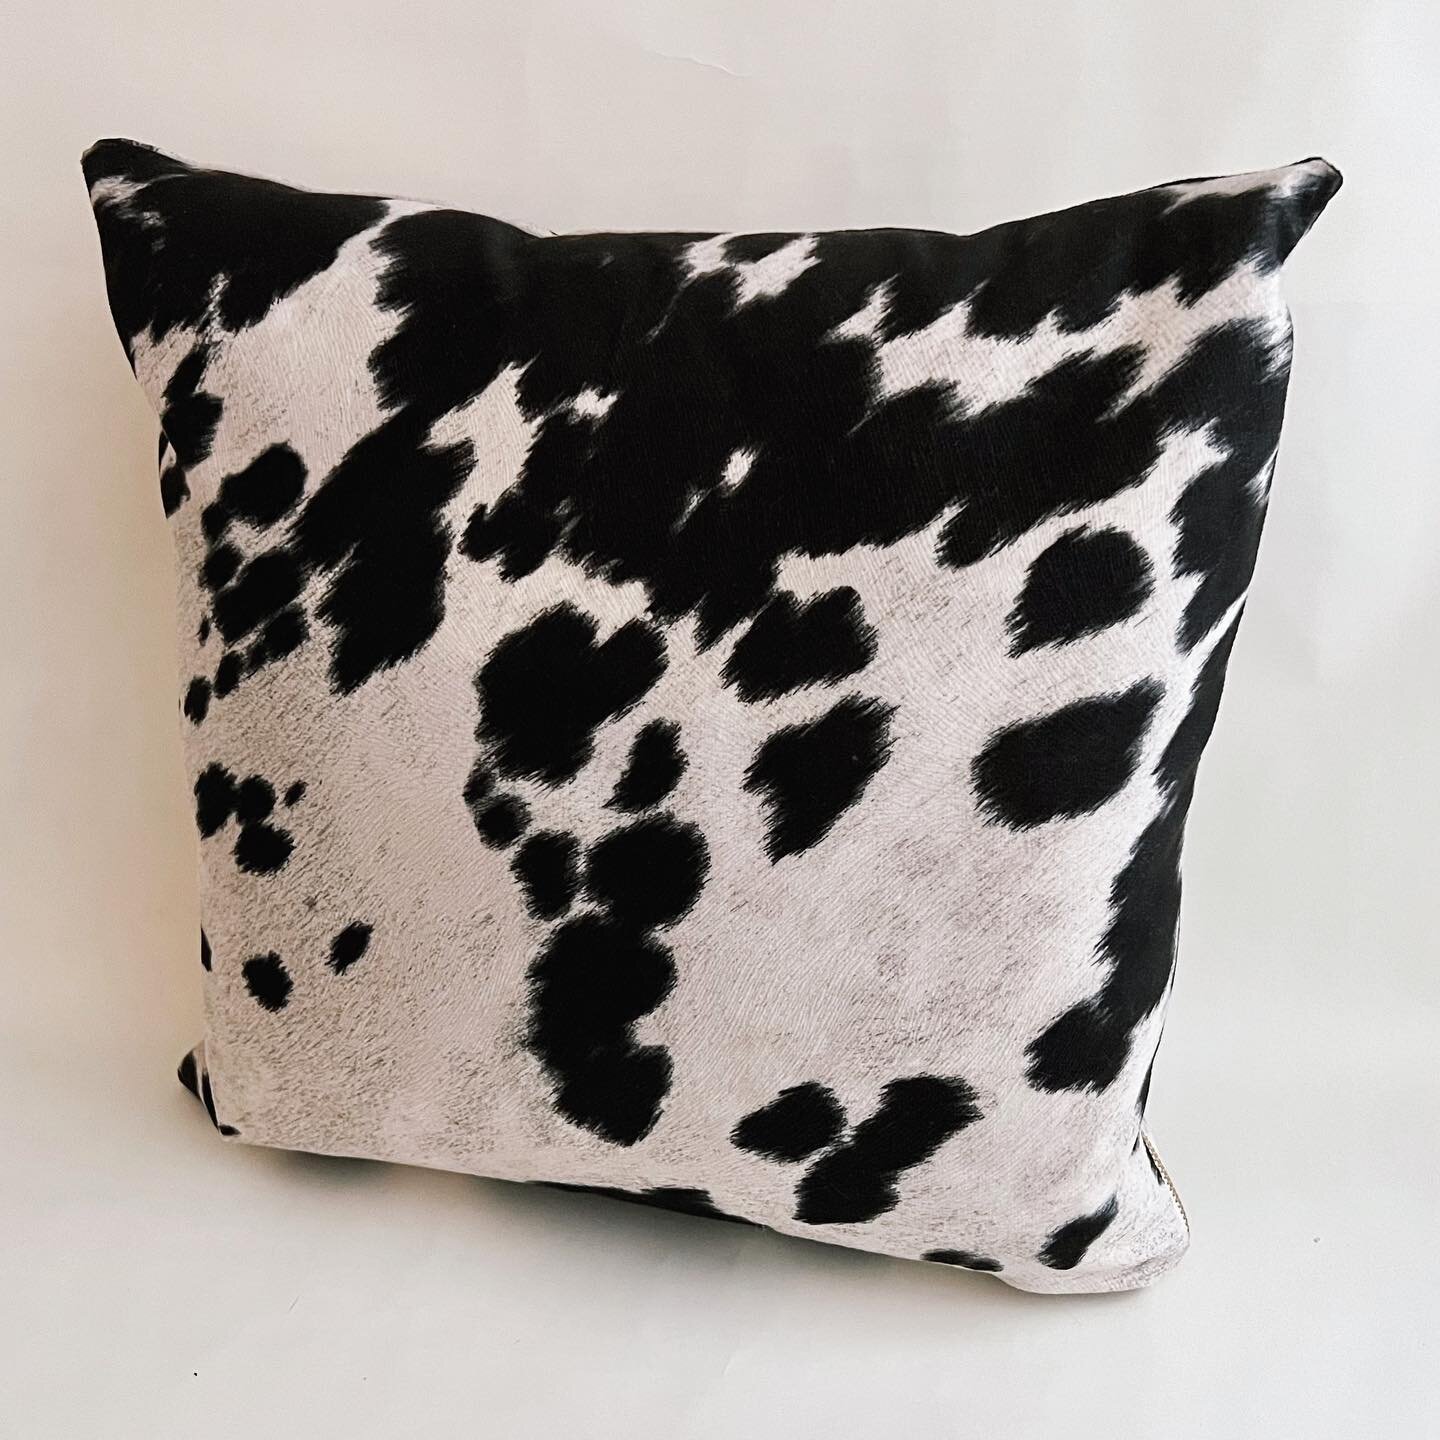 Cow print pillow covers on sale right now for $16 until Saturday! Soft and cozy faux suede fabric 🐄 Link in bio🌟